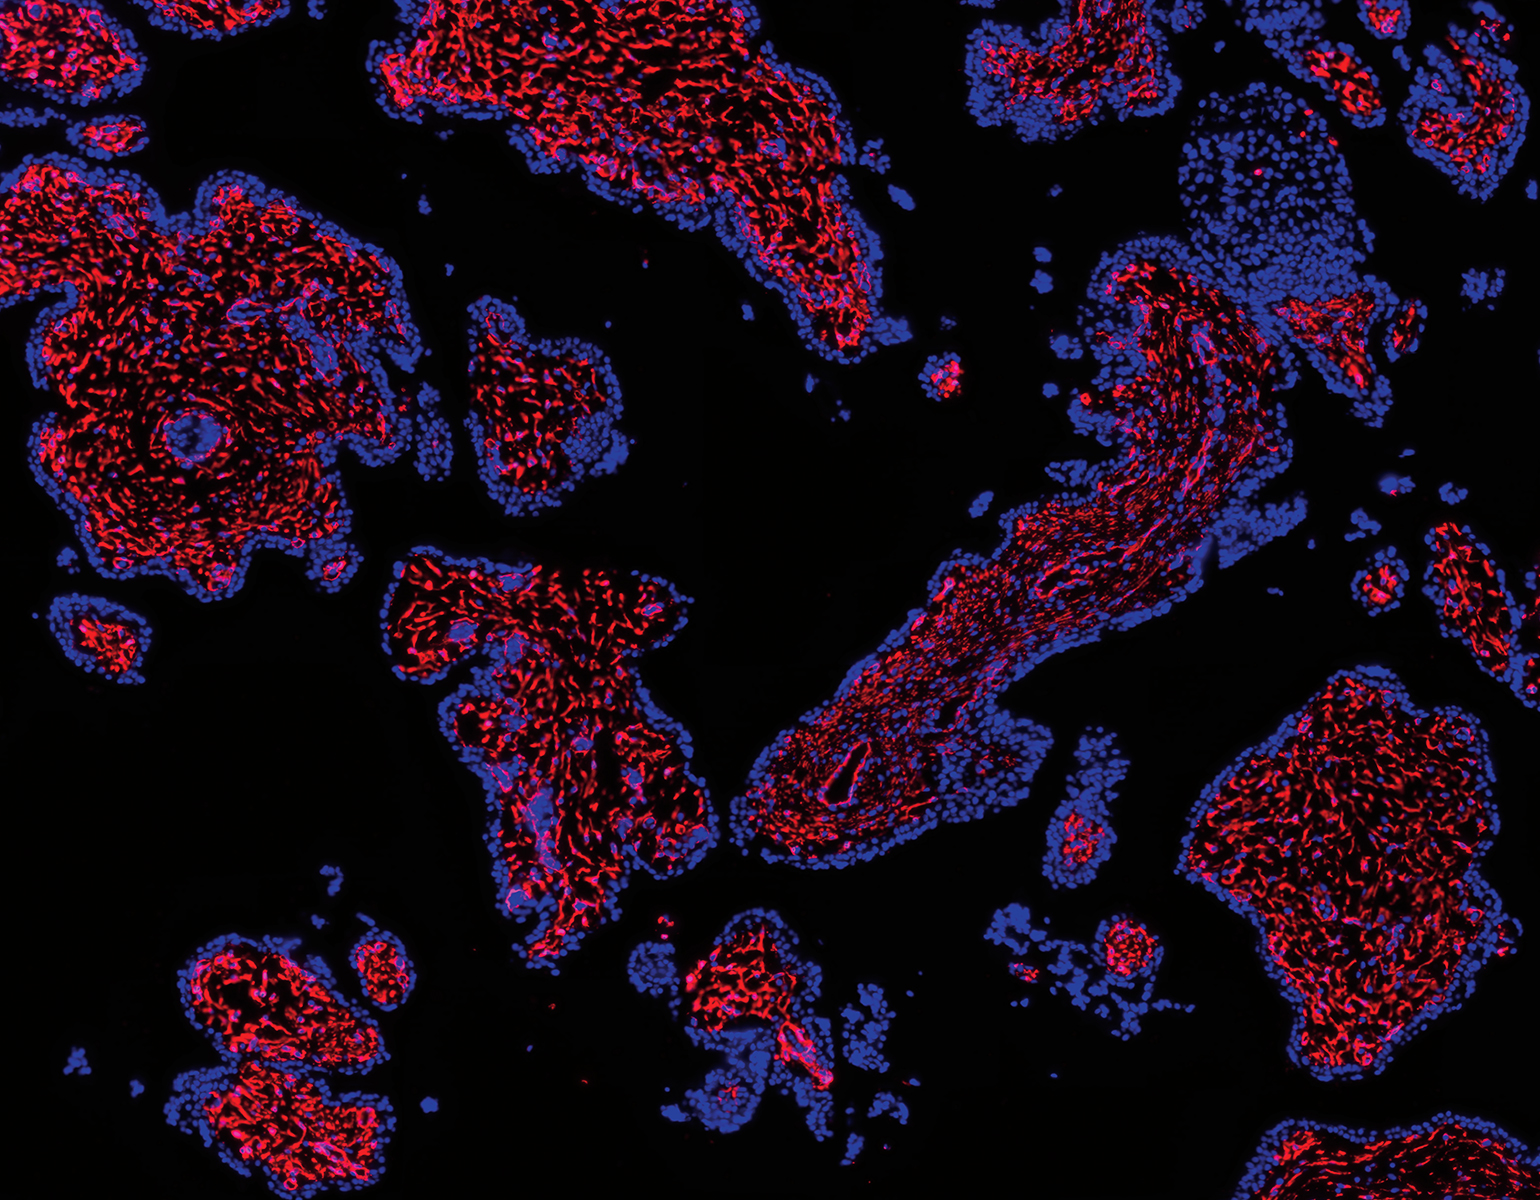 Stromal and endothelial cells of the plancenta, in red.